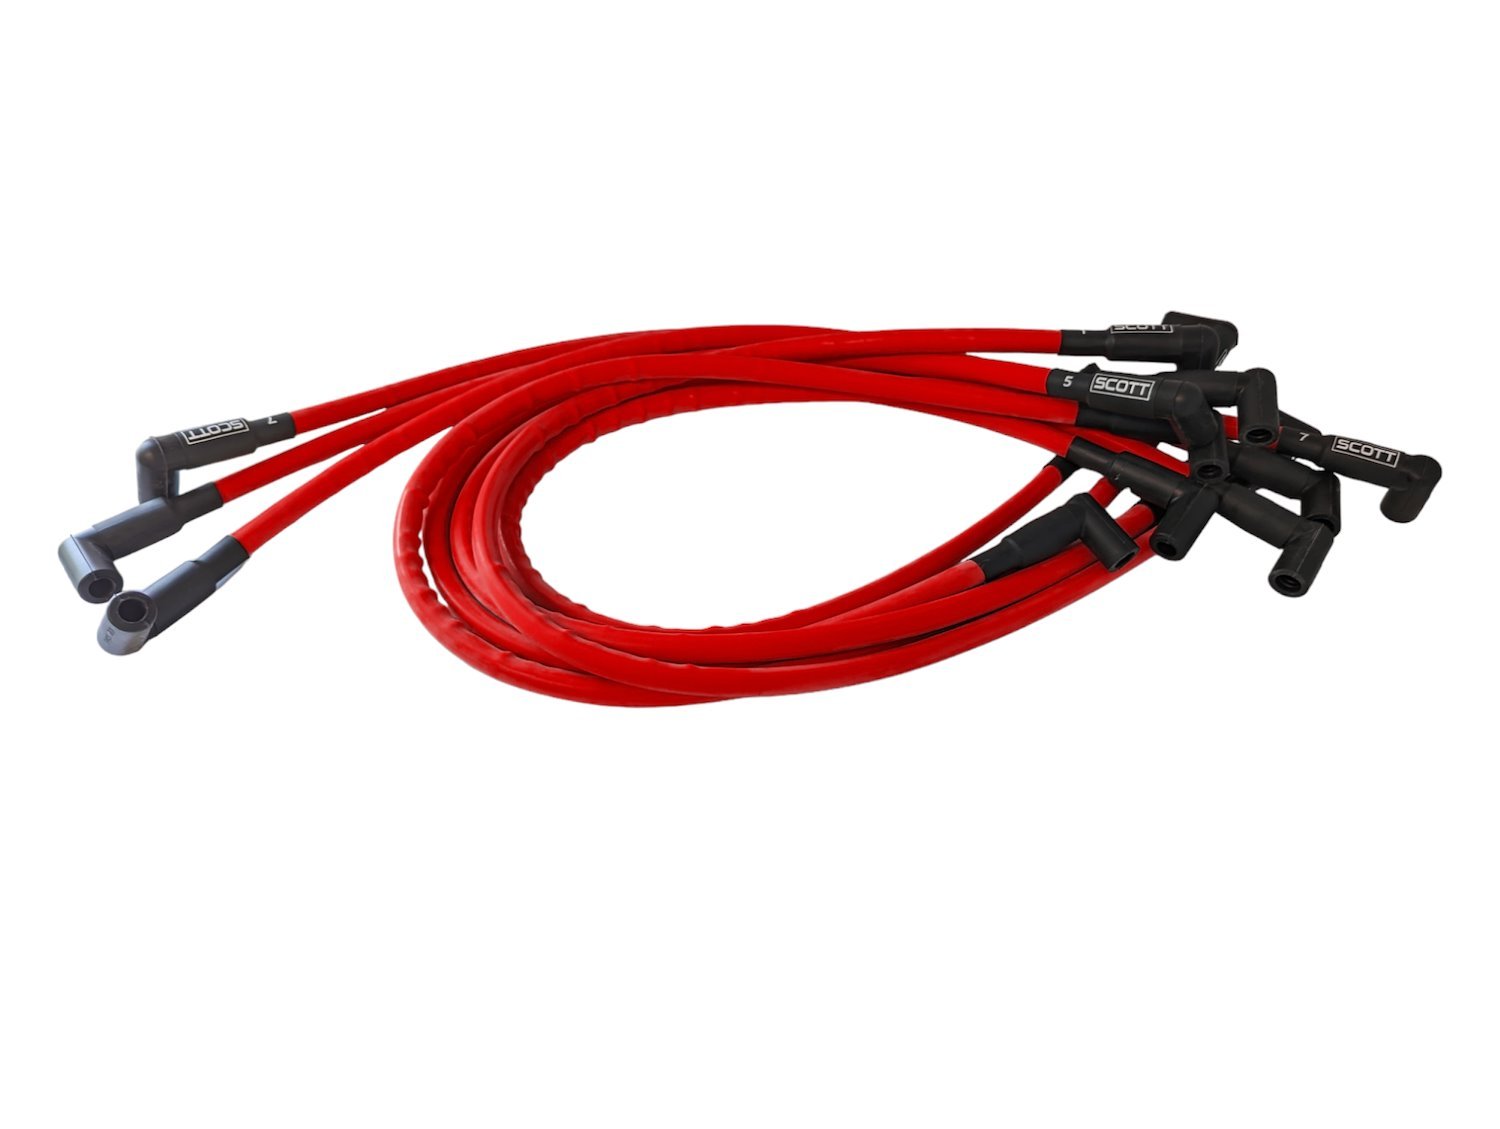 SPW-CH-430-2 High-Performance Silicone-Sleeved Spark Plug Wire Set for Big Block Ford, Under Header [Red]